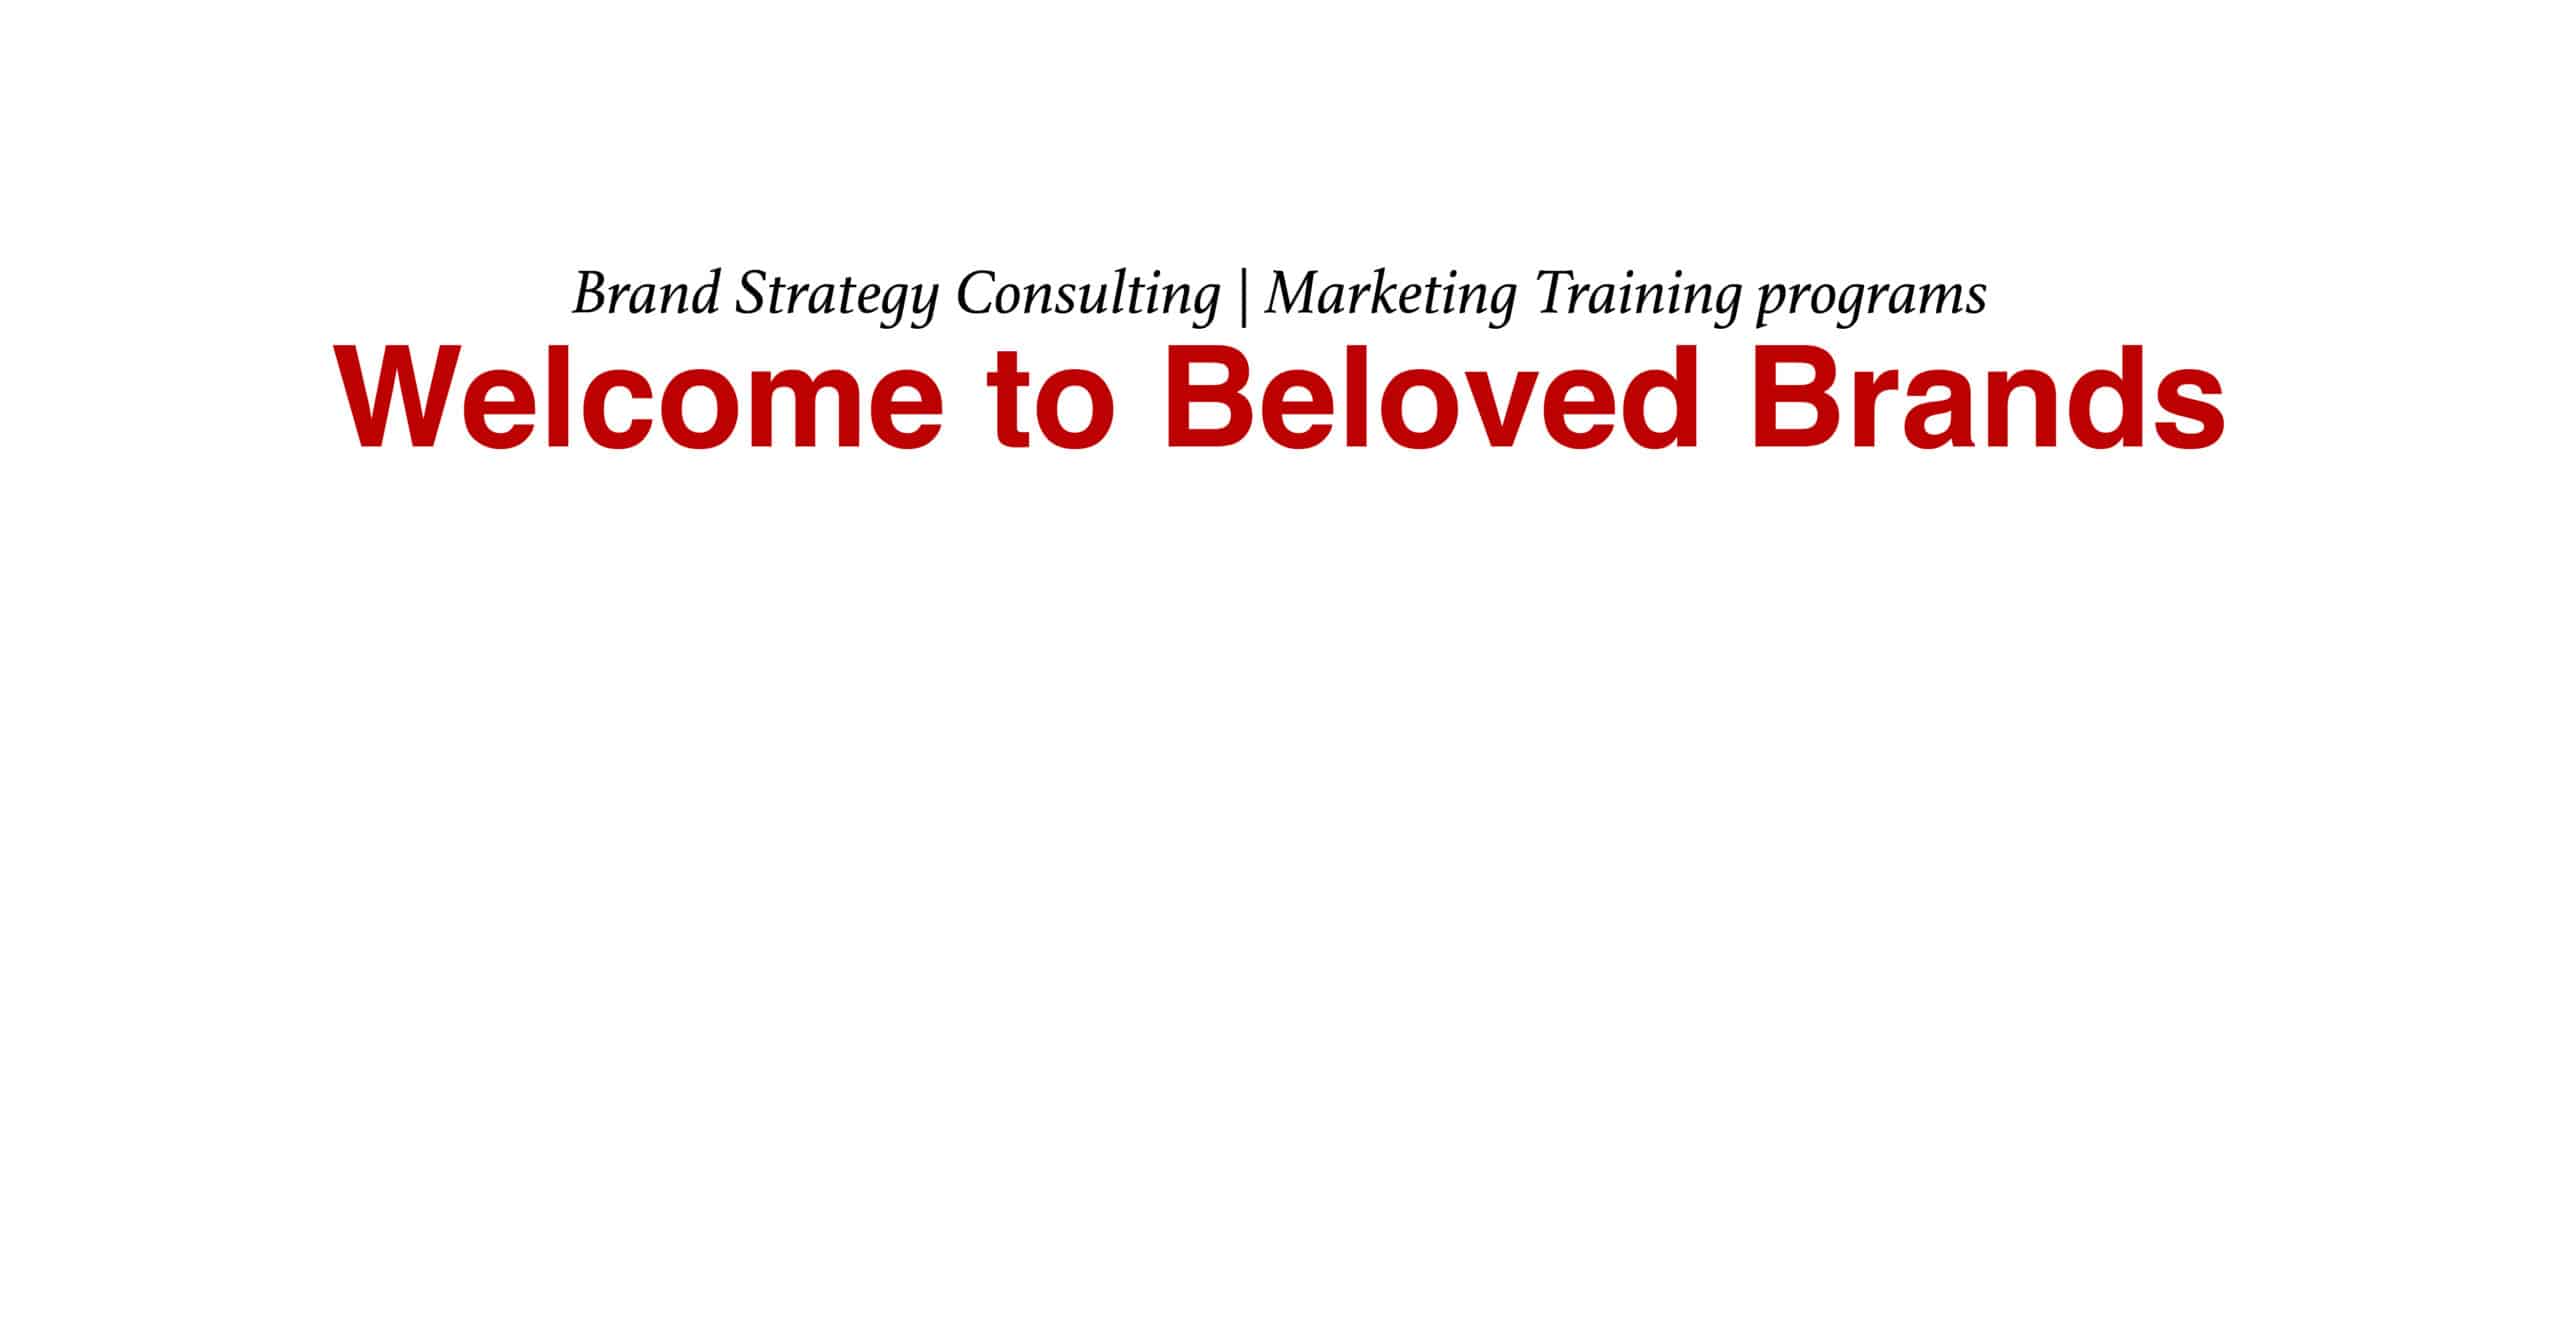 Brand Consulting and Marketing Training